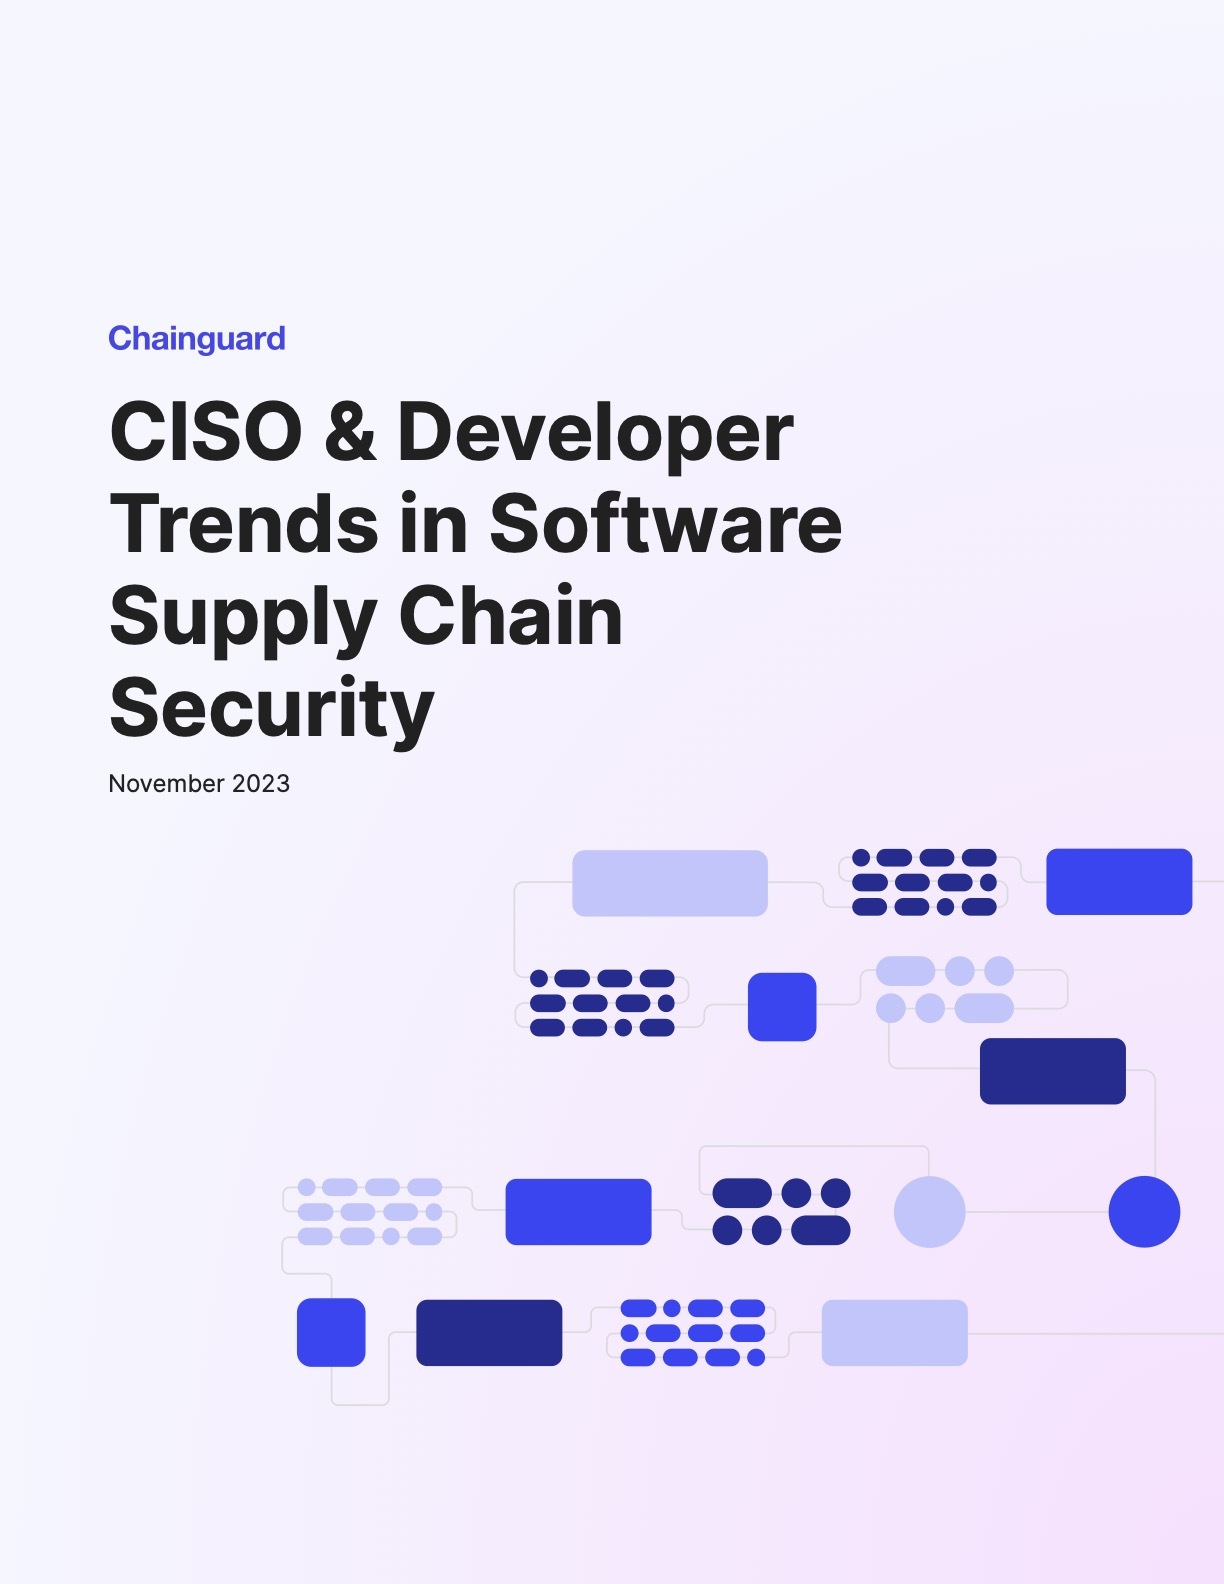 CISO and Developer Trends in Software Supply Chain Security